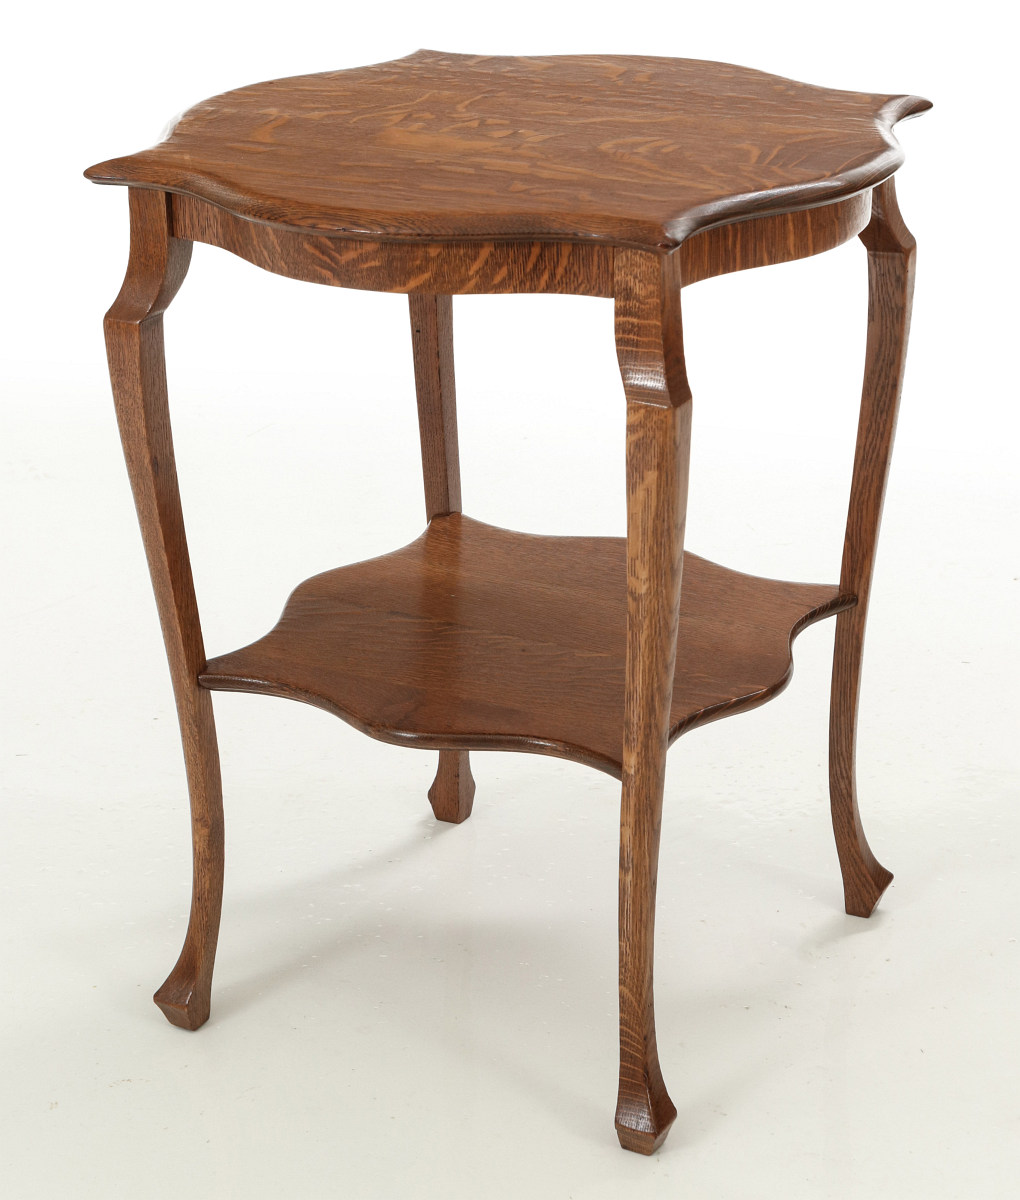 A LATE 19TH CENTURY AMERICAN OAK STAND TABLE